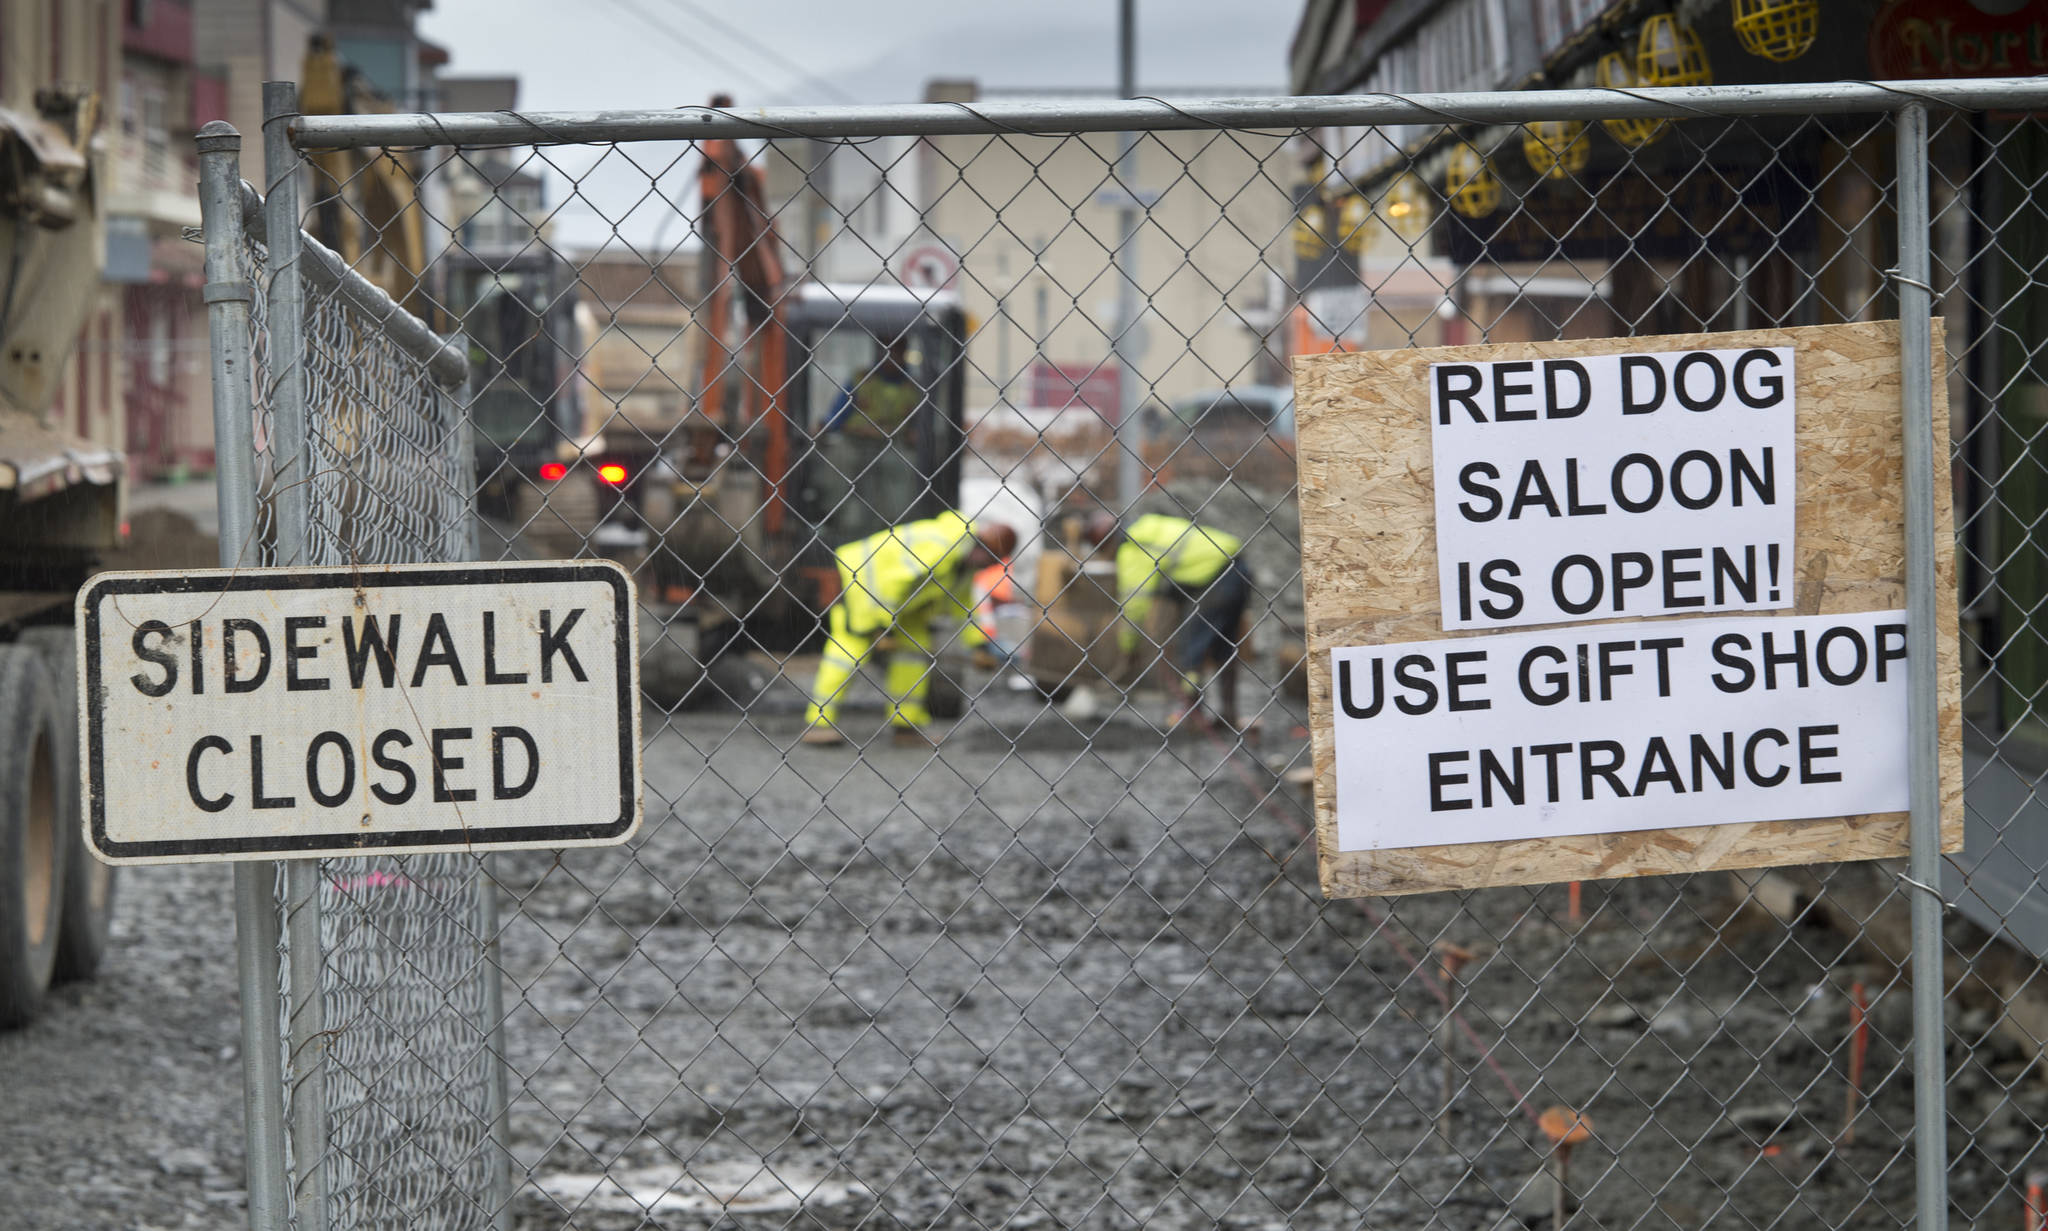 Pedestrian traffic has been closed on both sides of South Franklin Street as construction continues on Thursday. (Michael Penn | Juneau Empire)